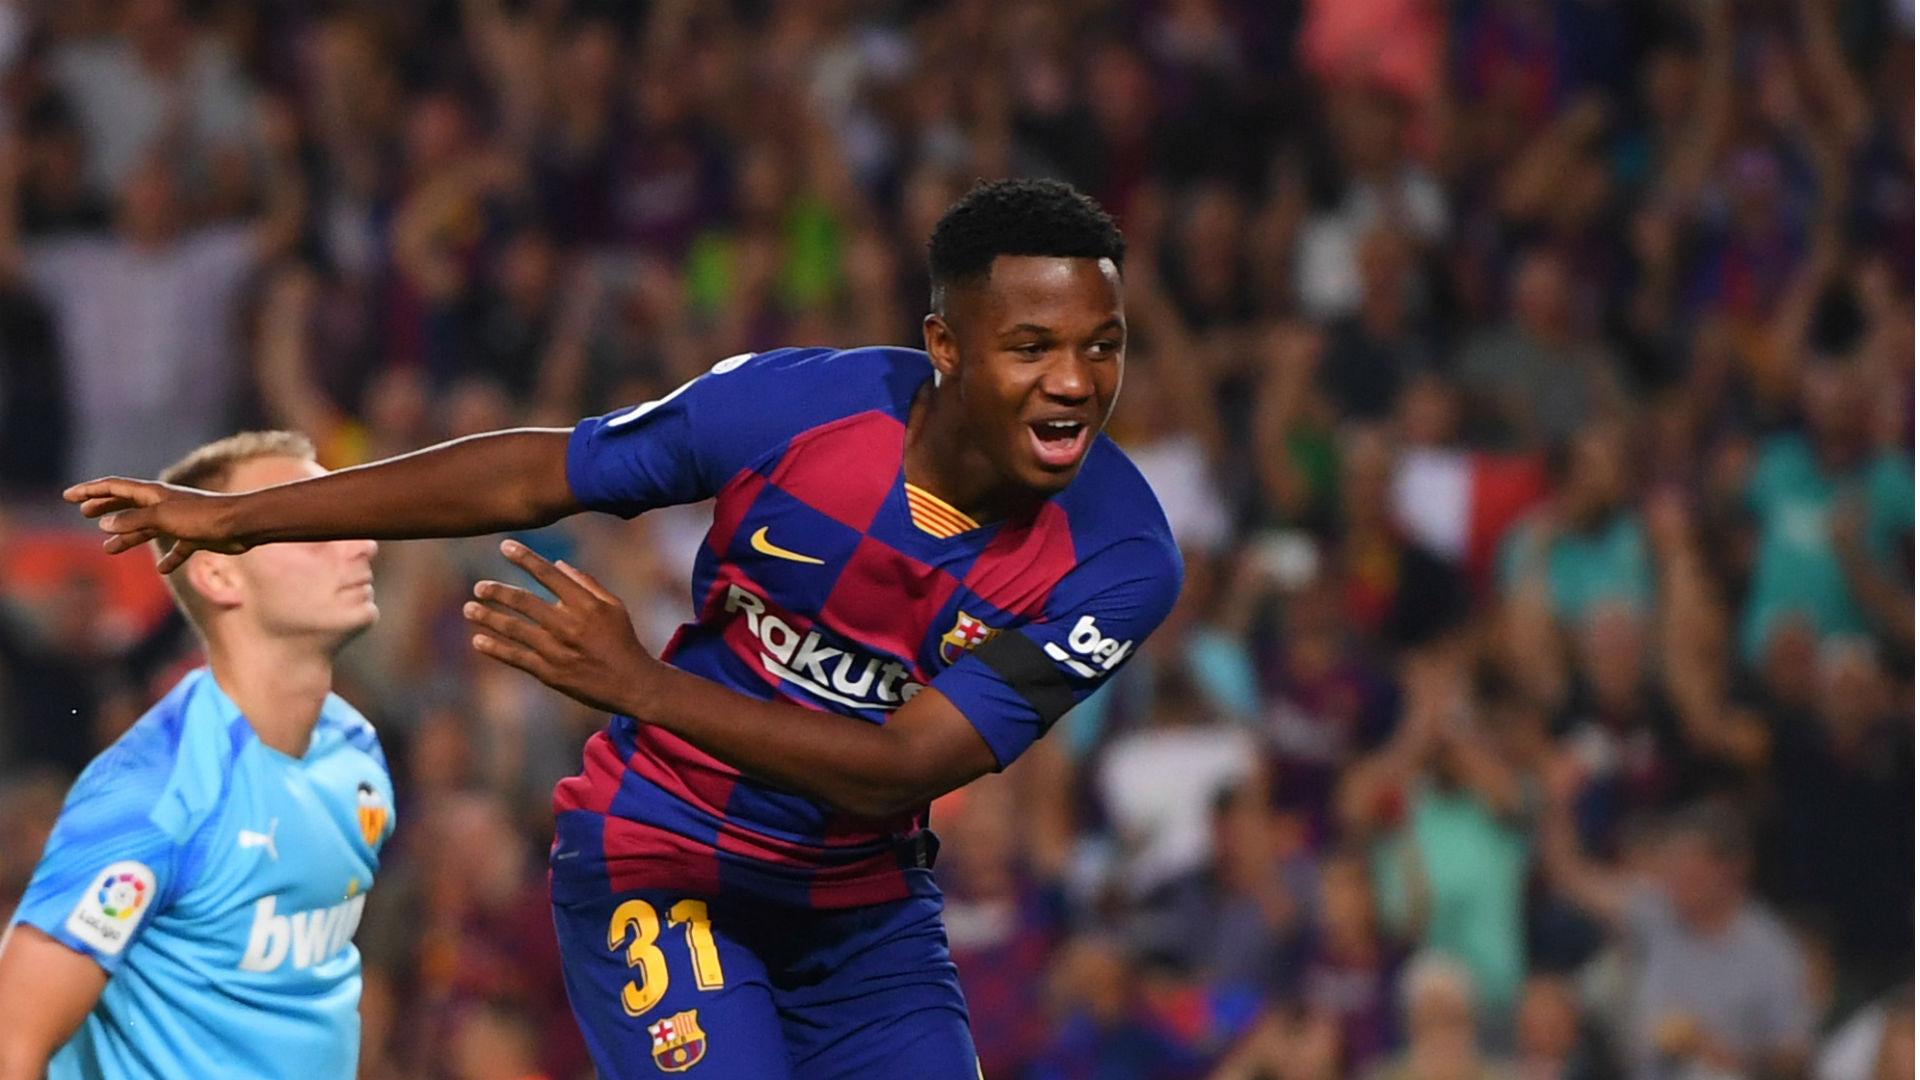 Barcelona teenager Ansu Fati must be treated with patience